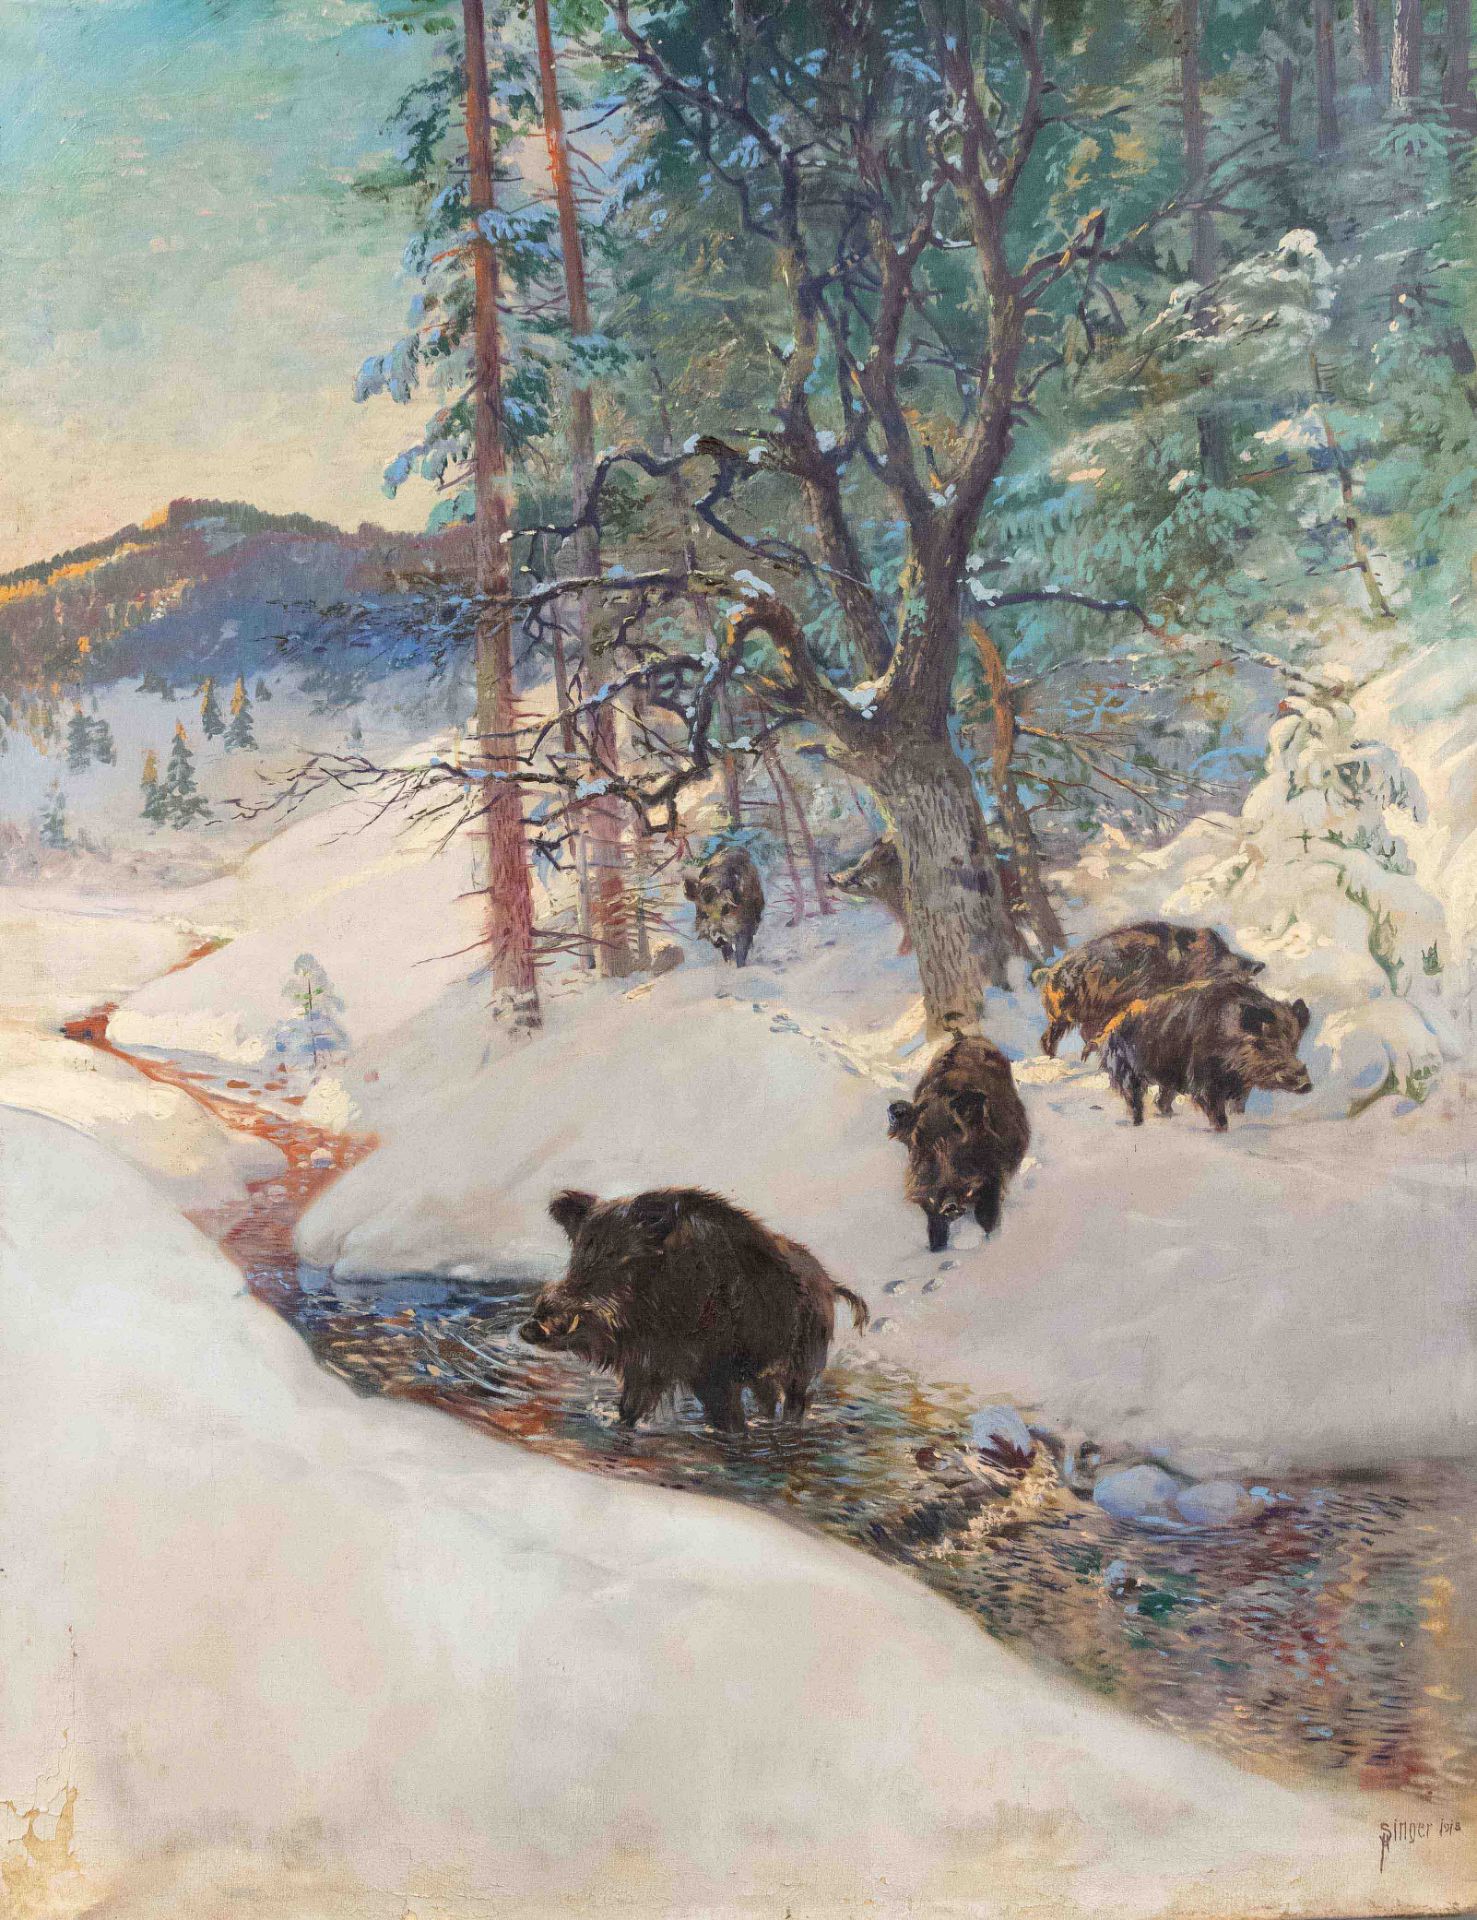 Albert Singer, (1869-1922), German hunting and genre painter, large winter landscape with wild